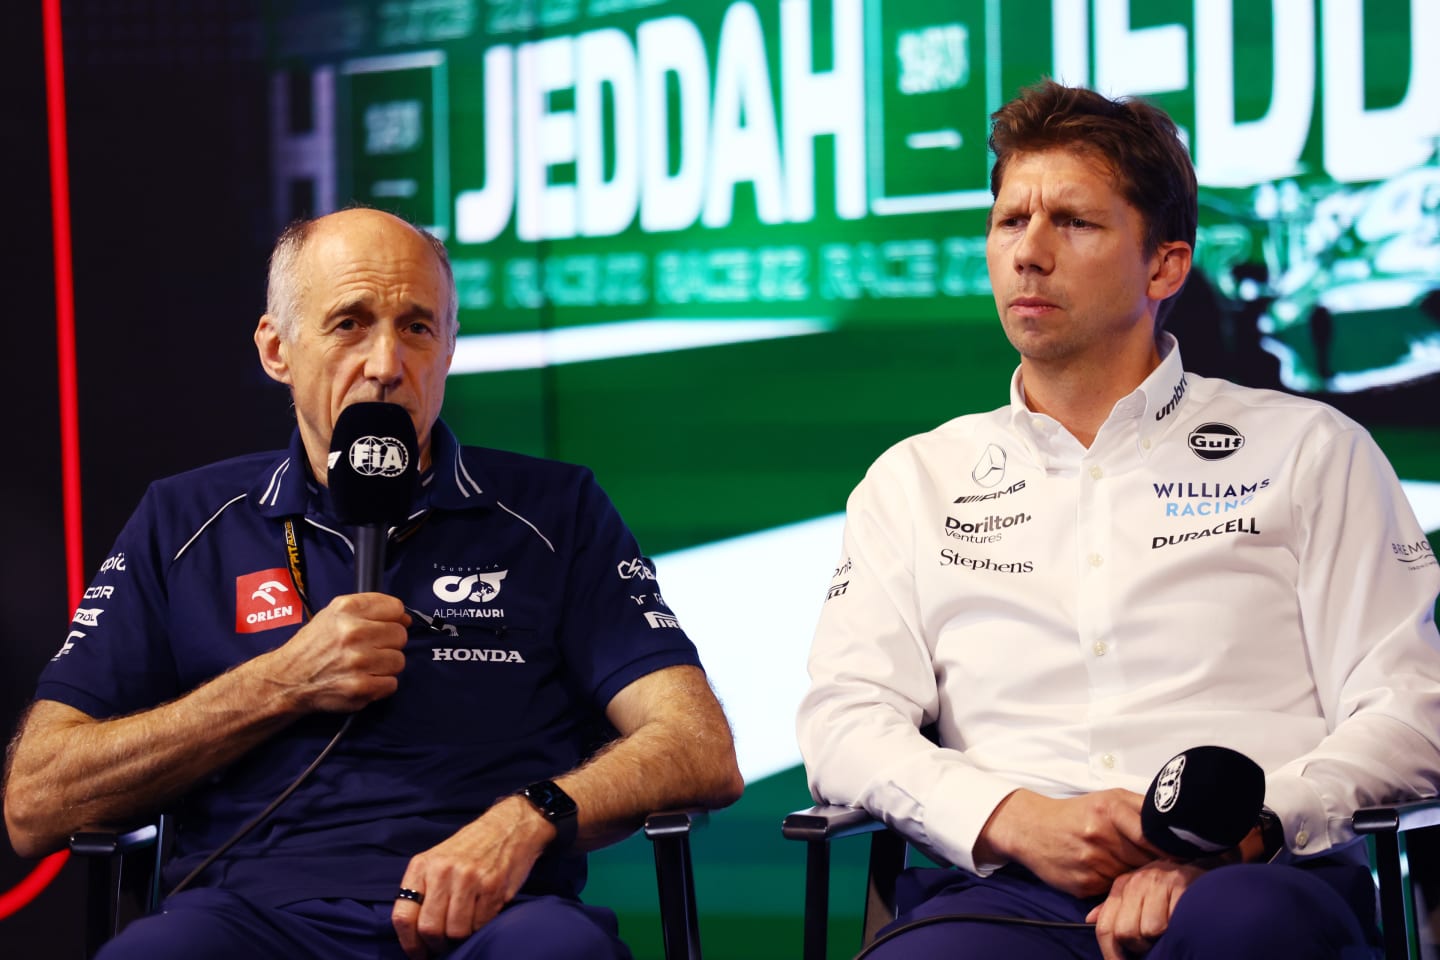 JEDDAH, SAUDI ARABIA - MARCH 17: Scuderia AlphaTauri Team Principal Franz Tost and James Vowles, Team Principal of Williams attend the Team Principals Press Conference during practice ahead of the F1 Grand Prix of Saudi Arabia at Jeddah Corniche Circuit on March 17, 2023 in Jeddah, Saudi Arabia. (Photo by Bryn Lennon/Getty Images)